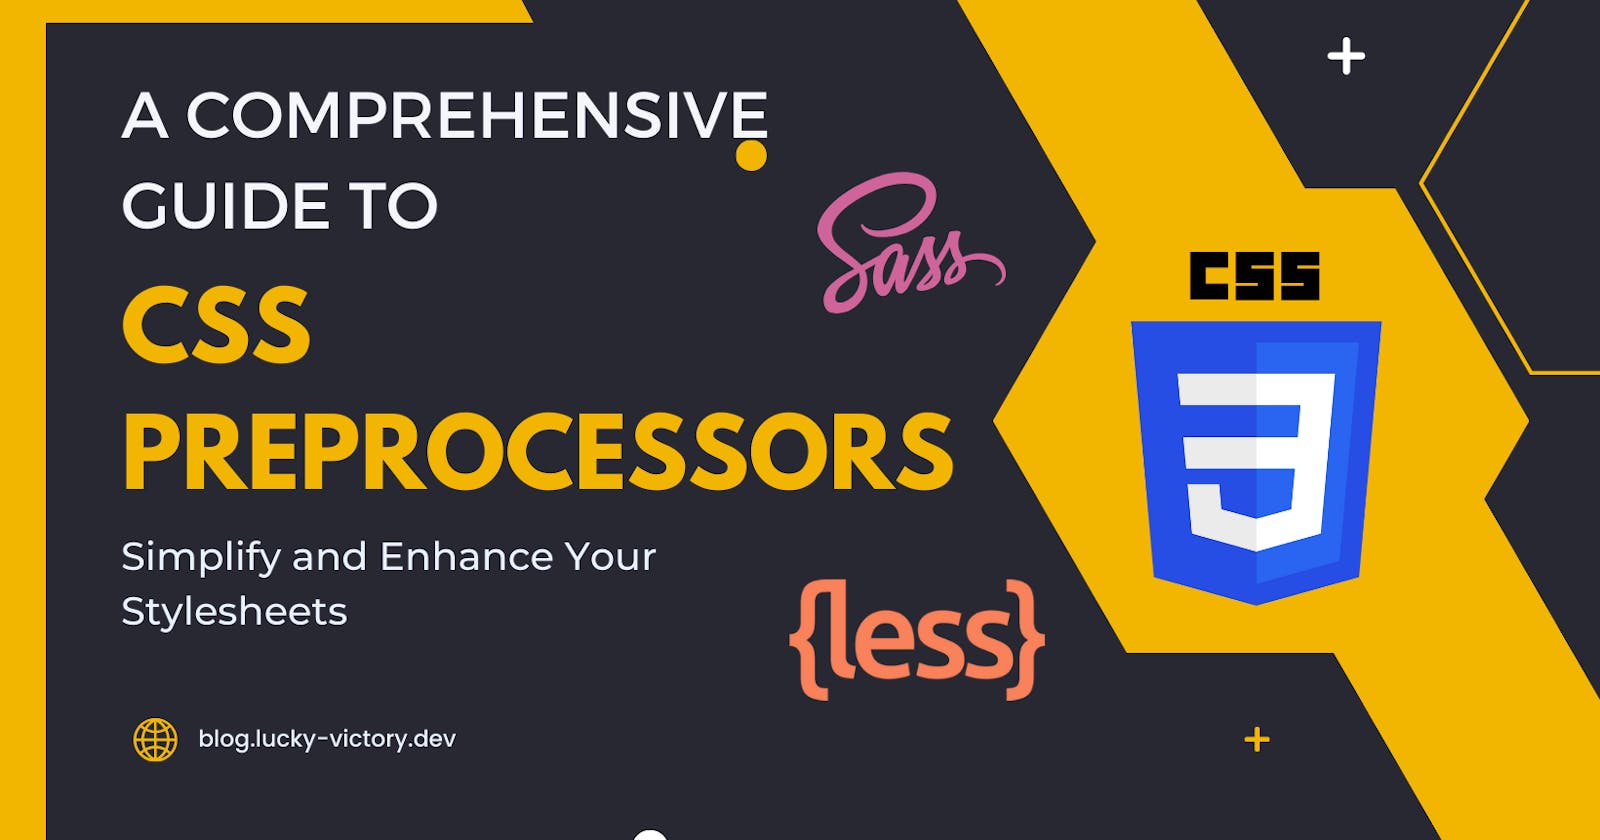 A Comprehensive Guide to CSS Preprocessors: Simplify and Enhance Your Stylesheets